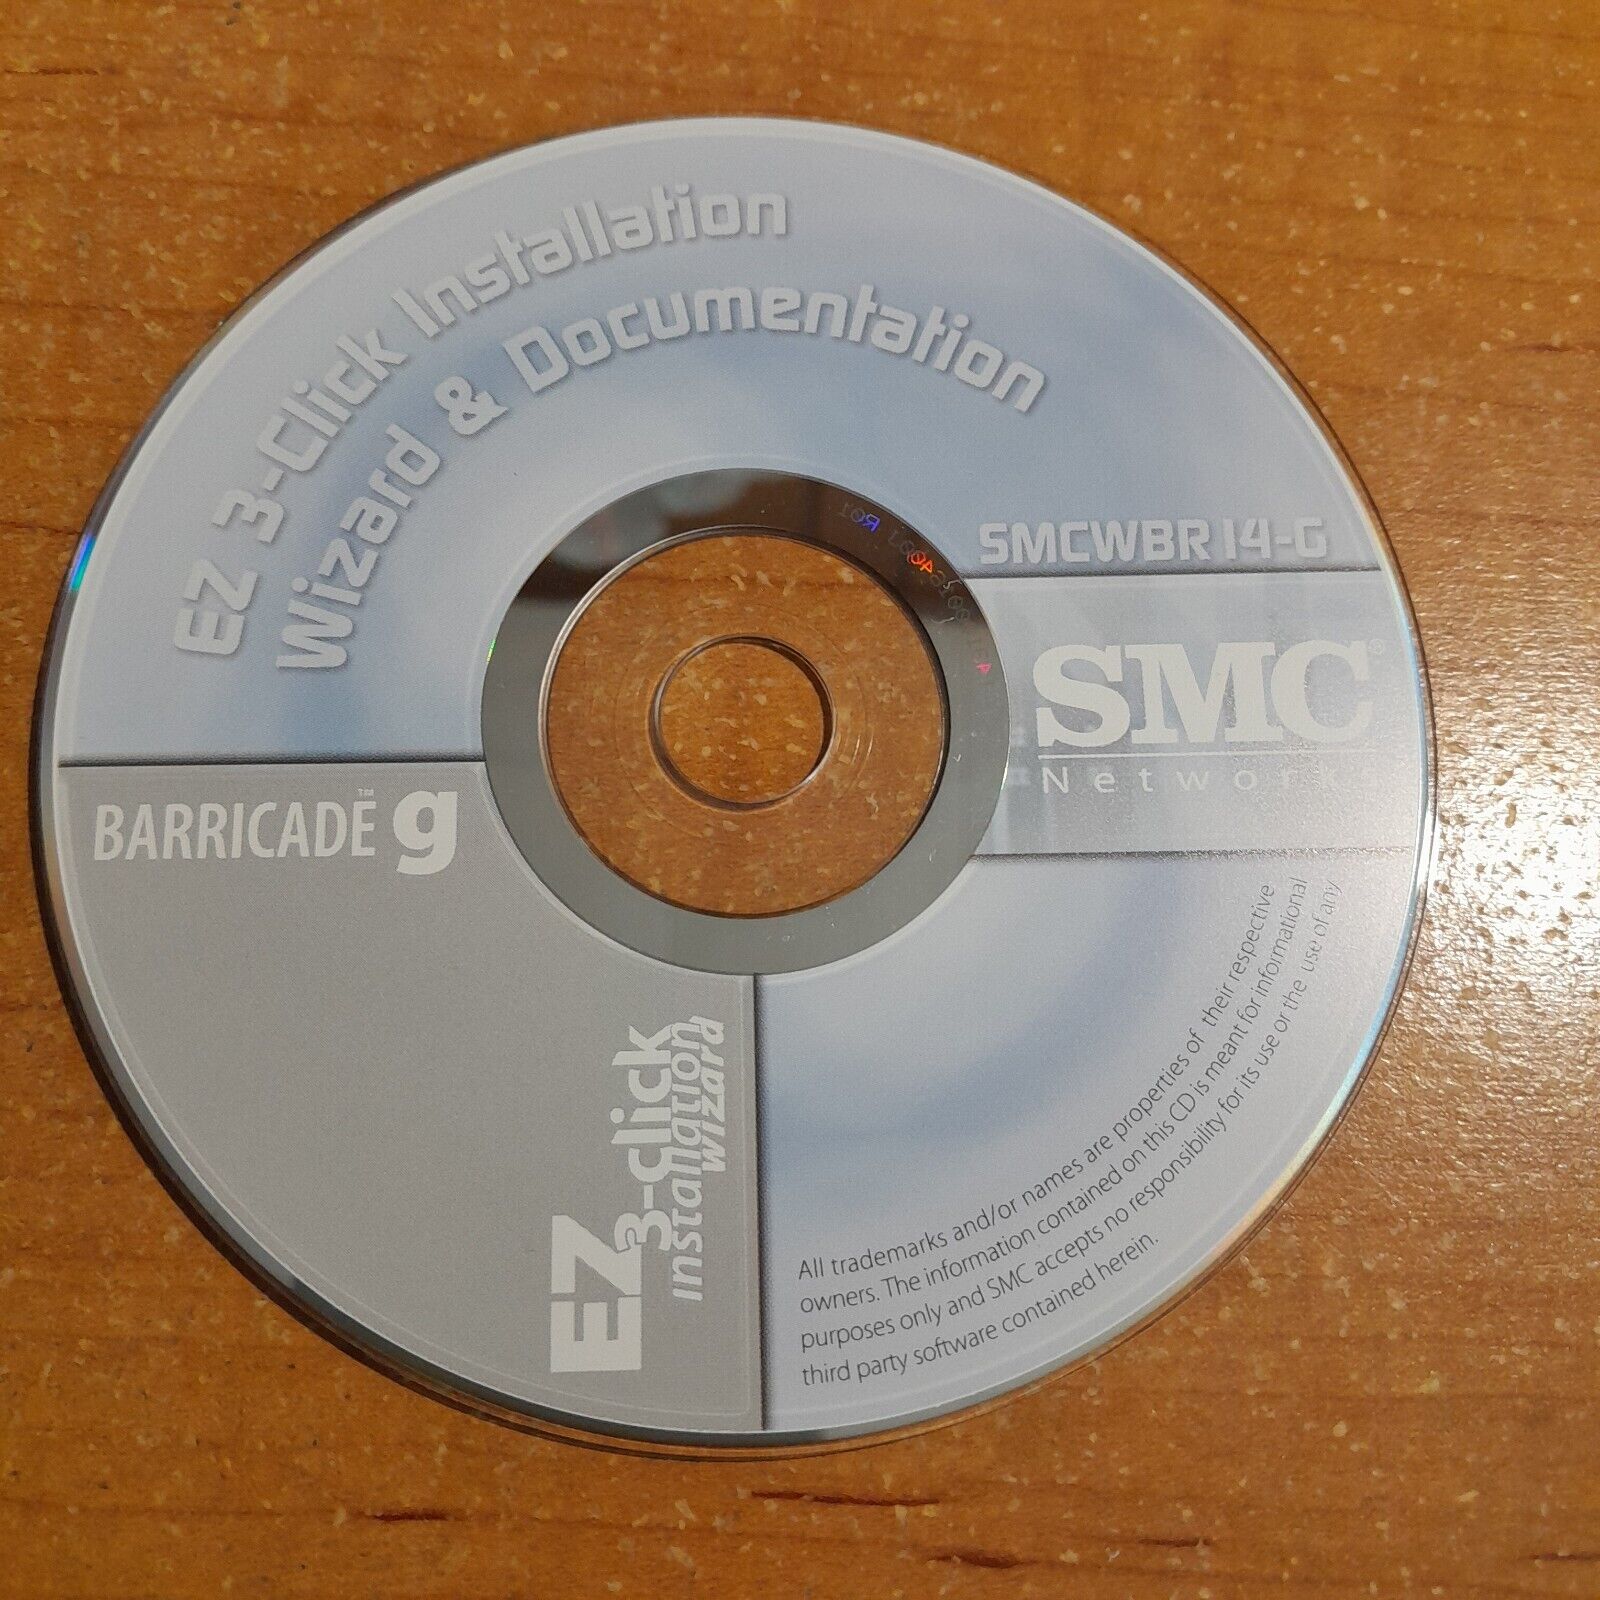 SMC SMCWBR14-G Installation and Documentation Drivers DISC ONLY Barricade G